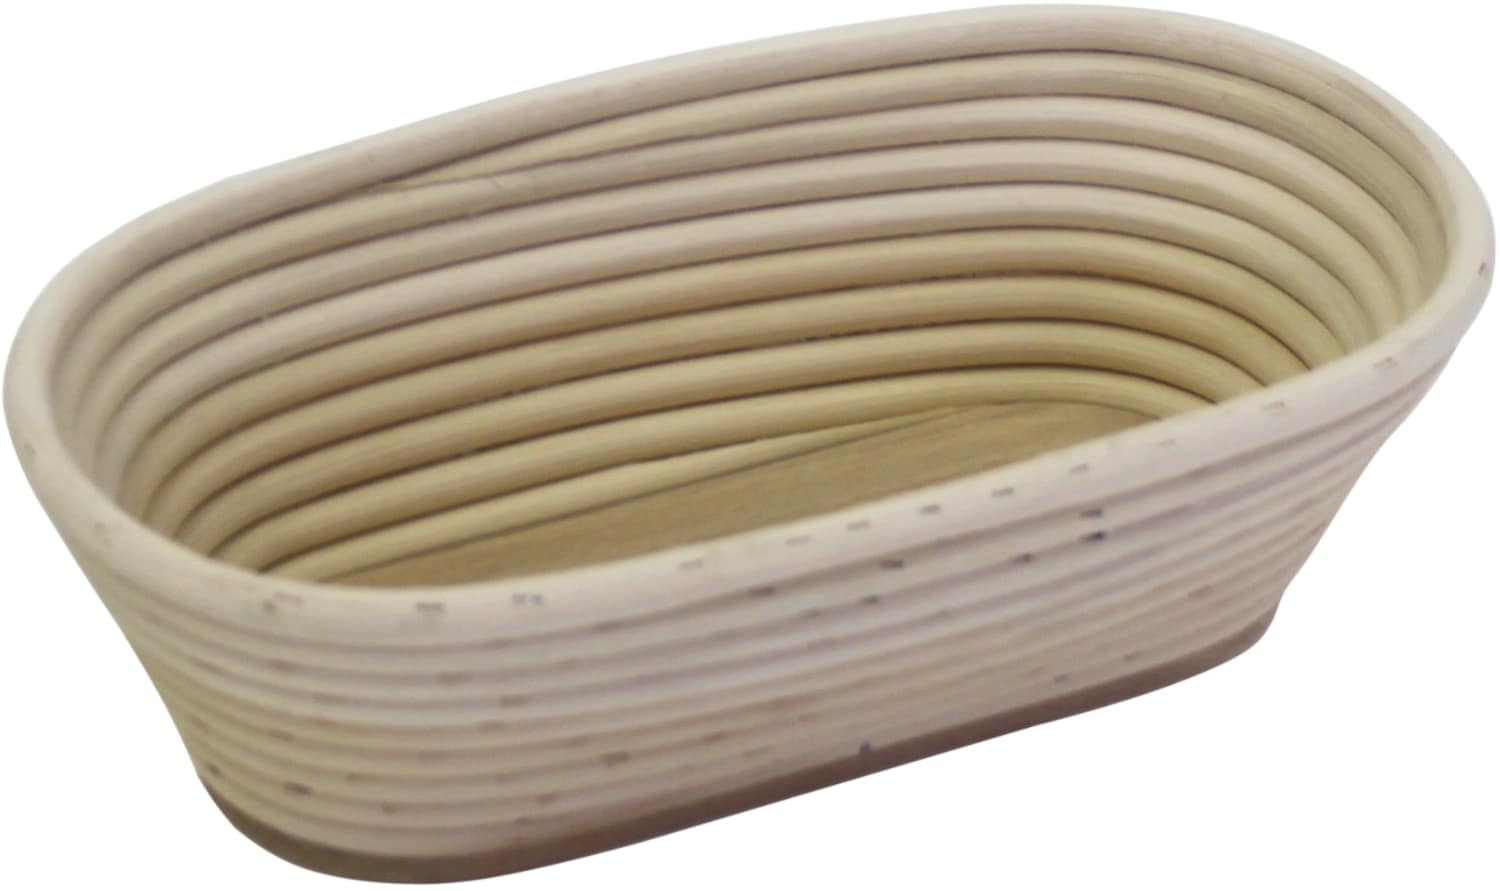 Bread proofing baskets long, round shape wooden bottom